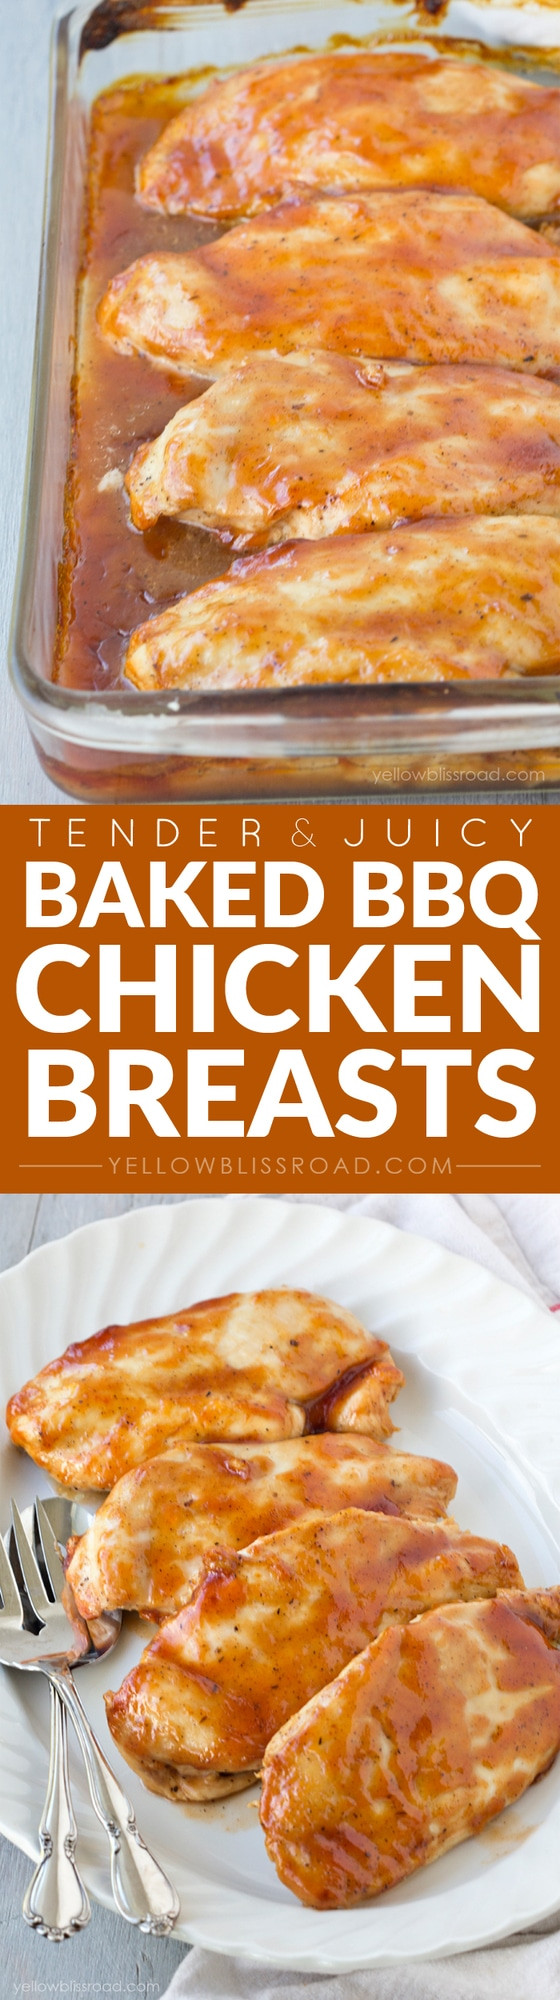 Baked Bbq Chicken Breasts
 Baked Barbecue Chicken Yellow Bliss Road